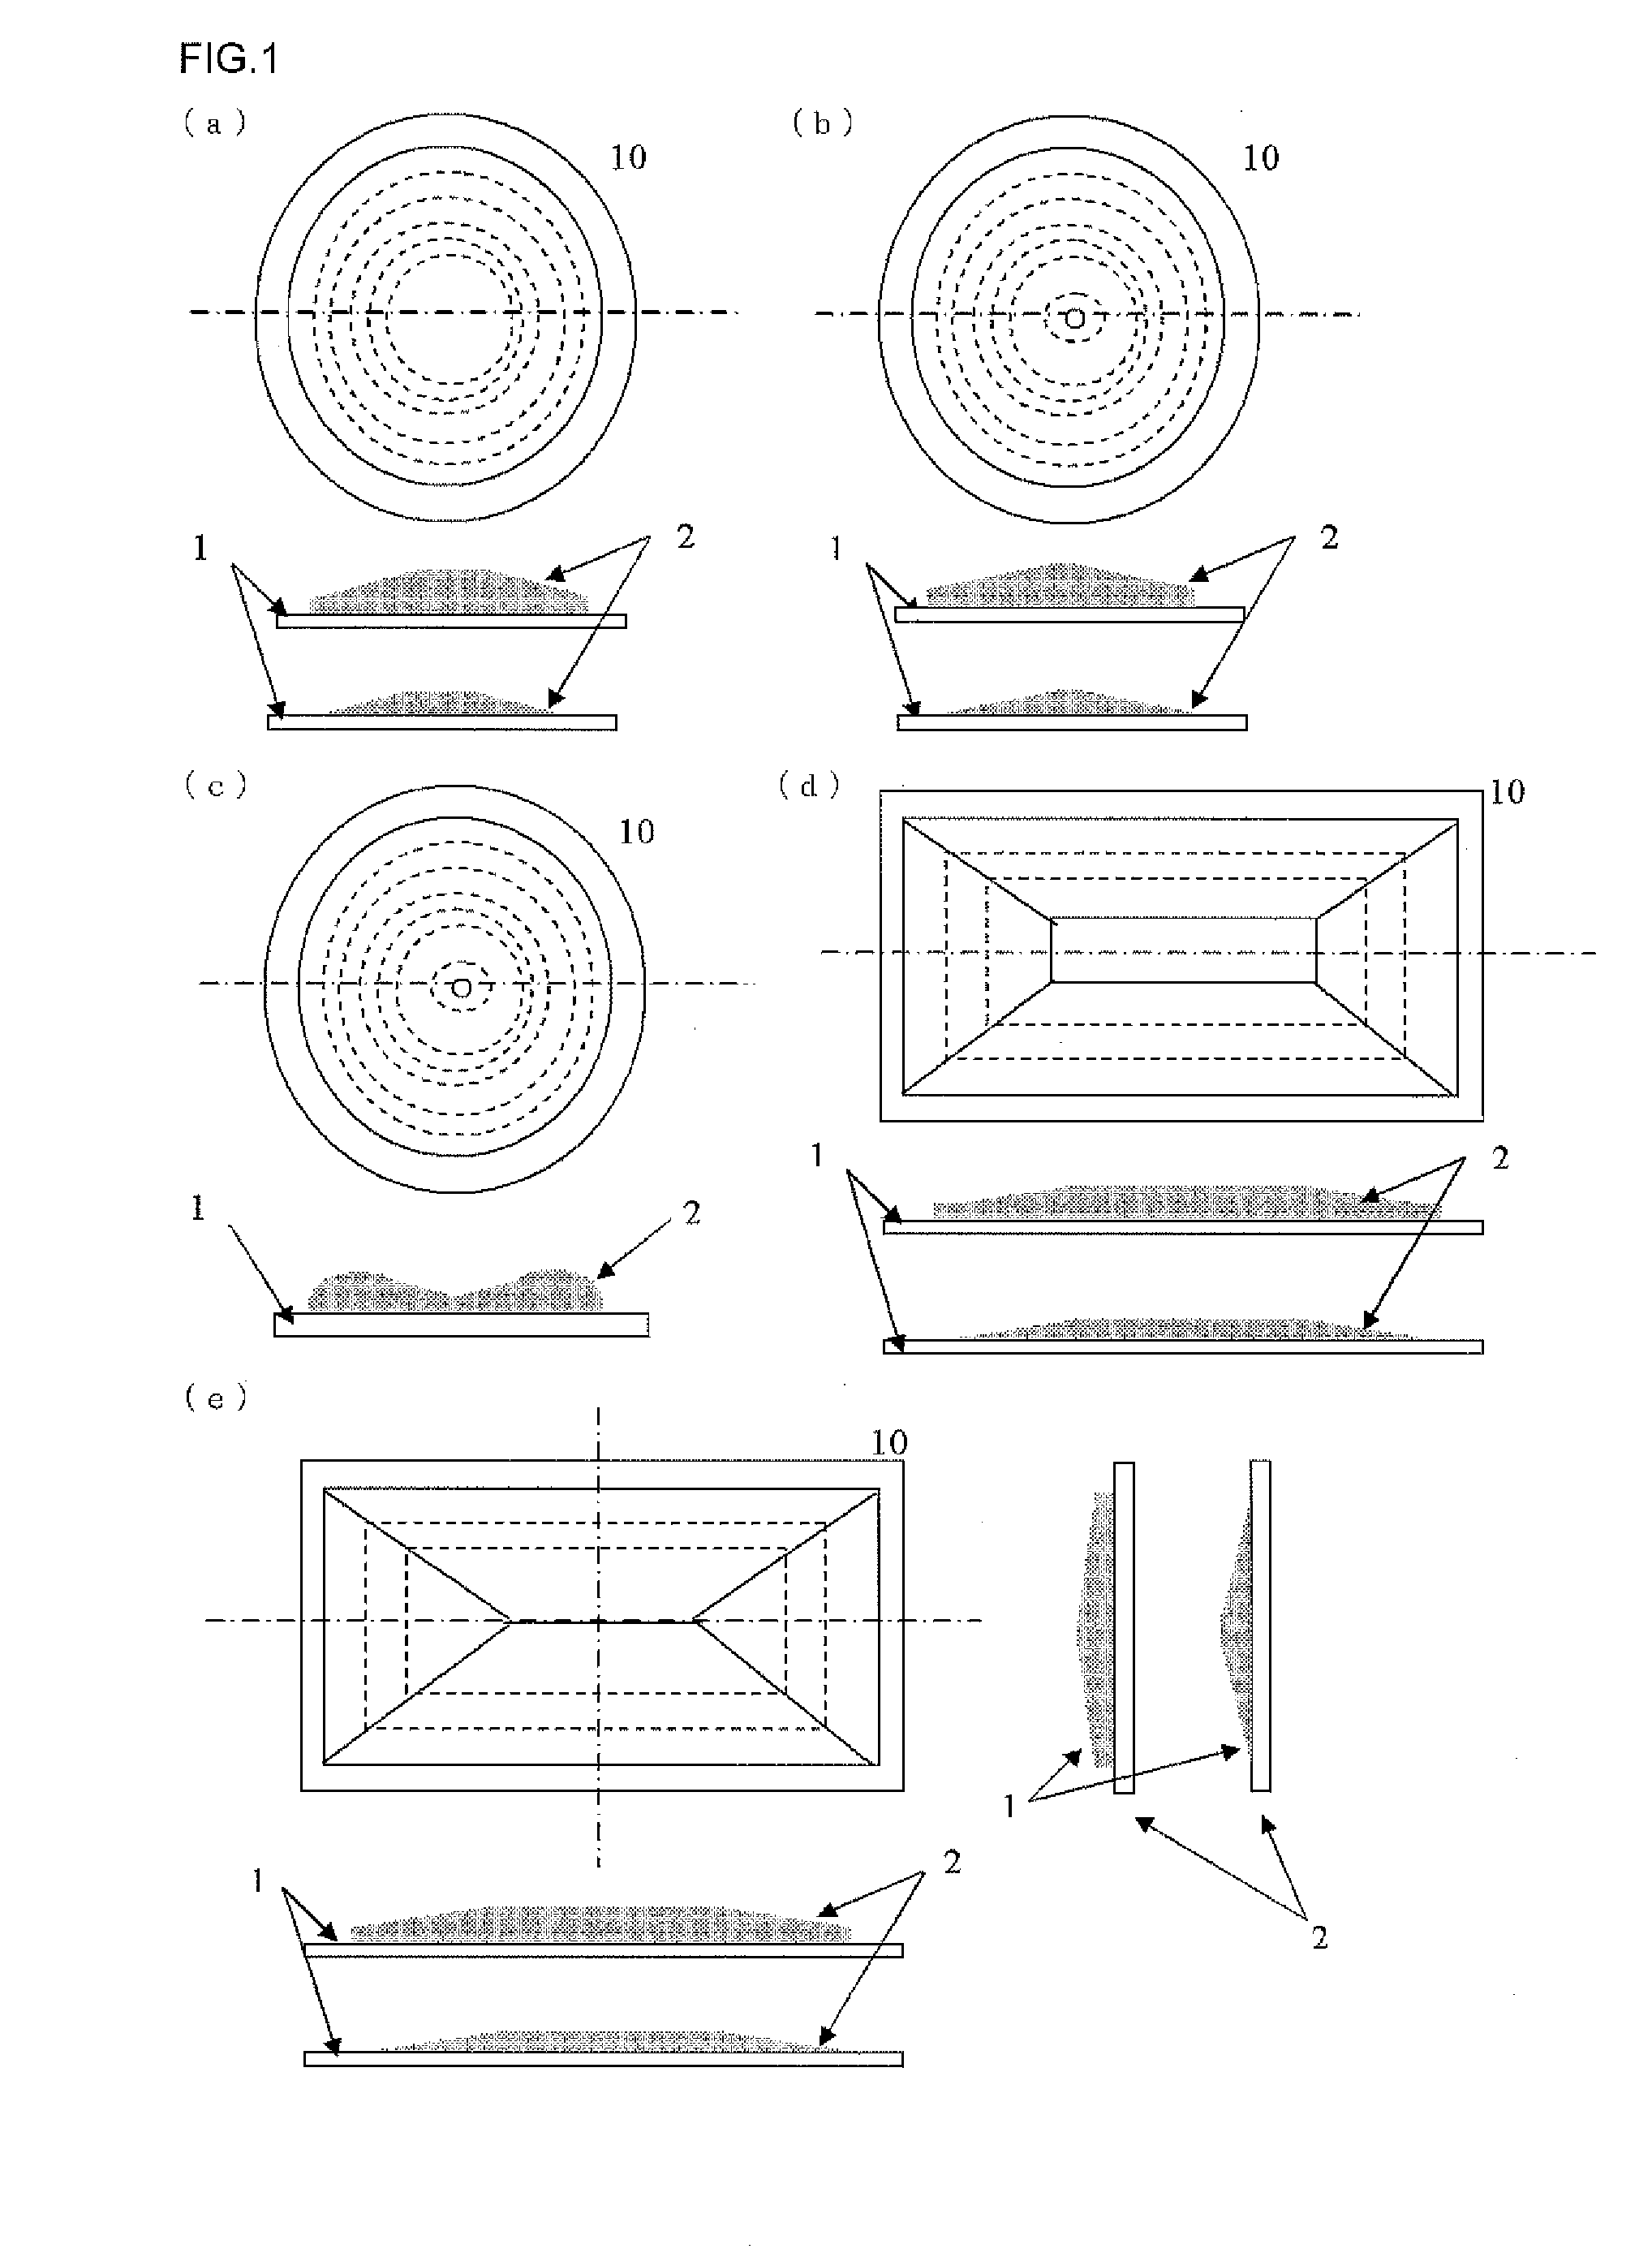 Encapsulant equipped with supporting substrate, encapsulated substrate having semiconductor devices mounting thereon, encapsulated wafer having semiconductor devices forming thereon, semiconductor apparatus, and method for manufacturing semiconductor apparatus